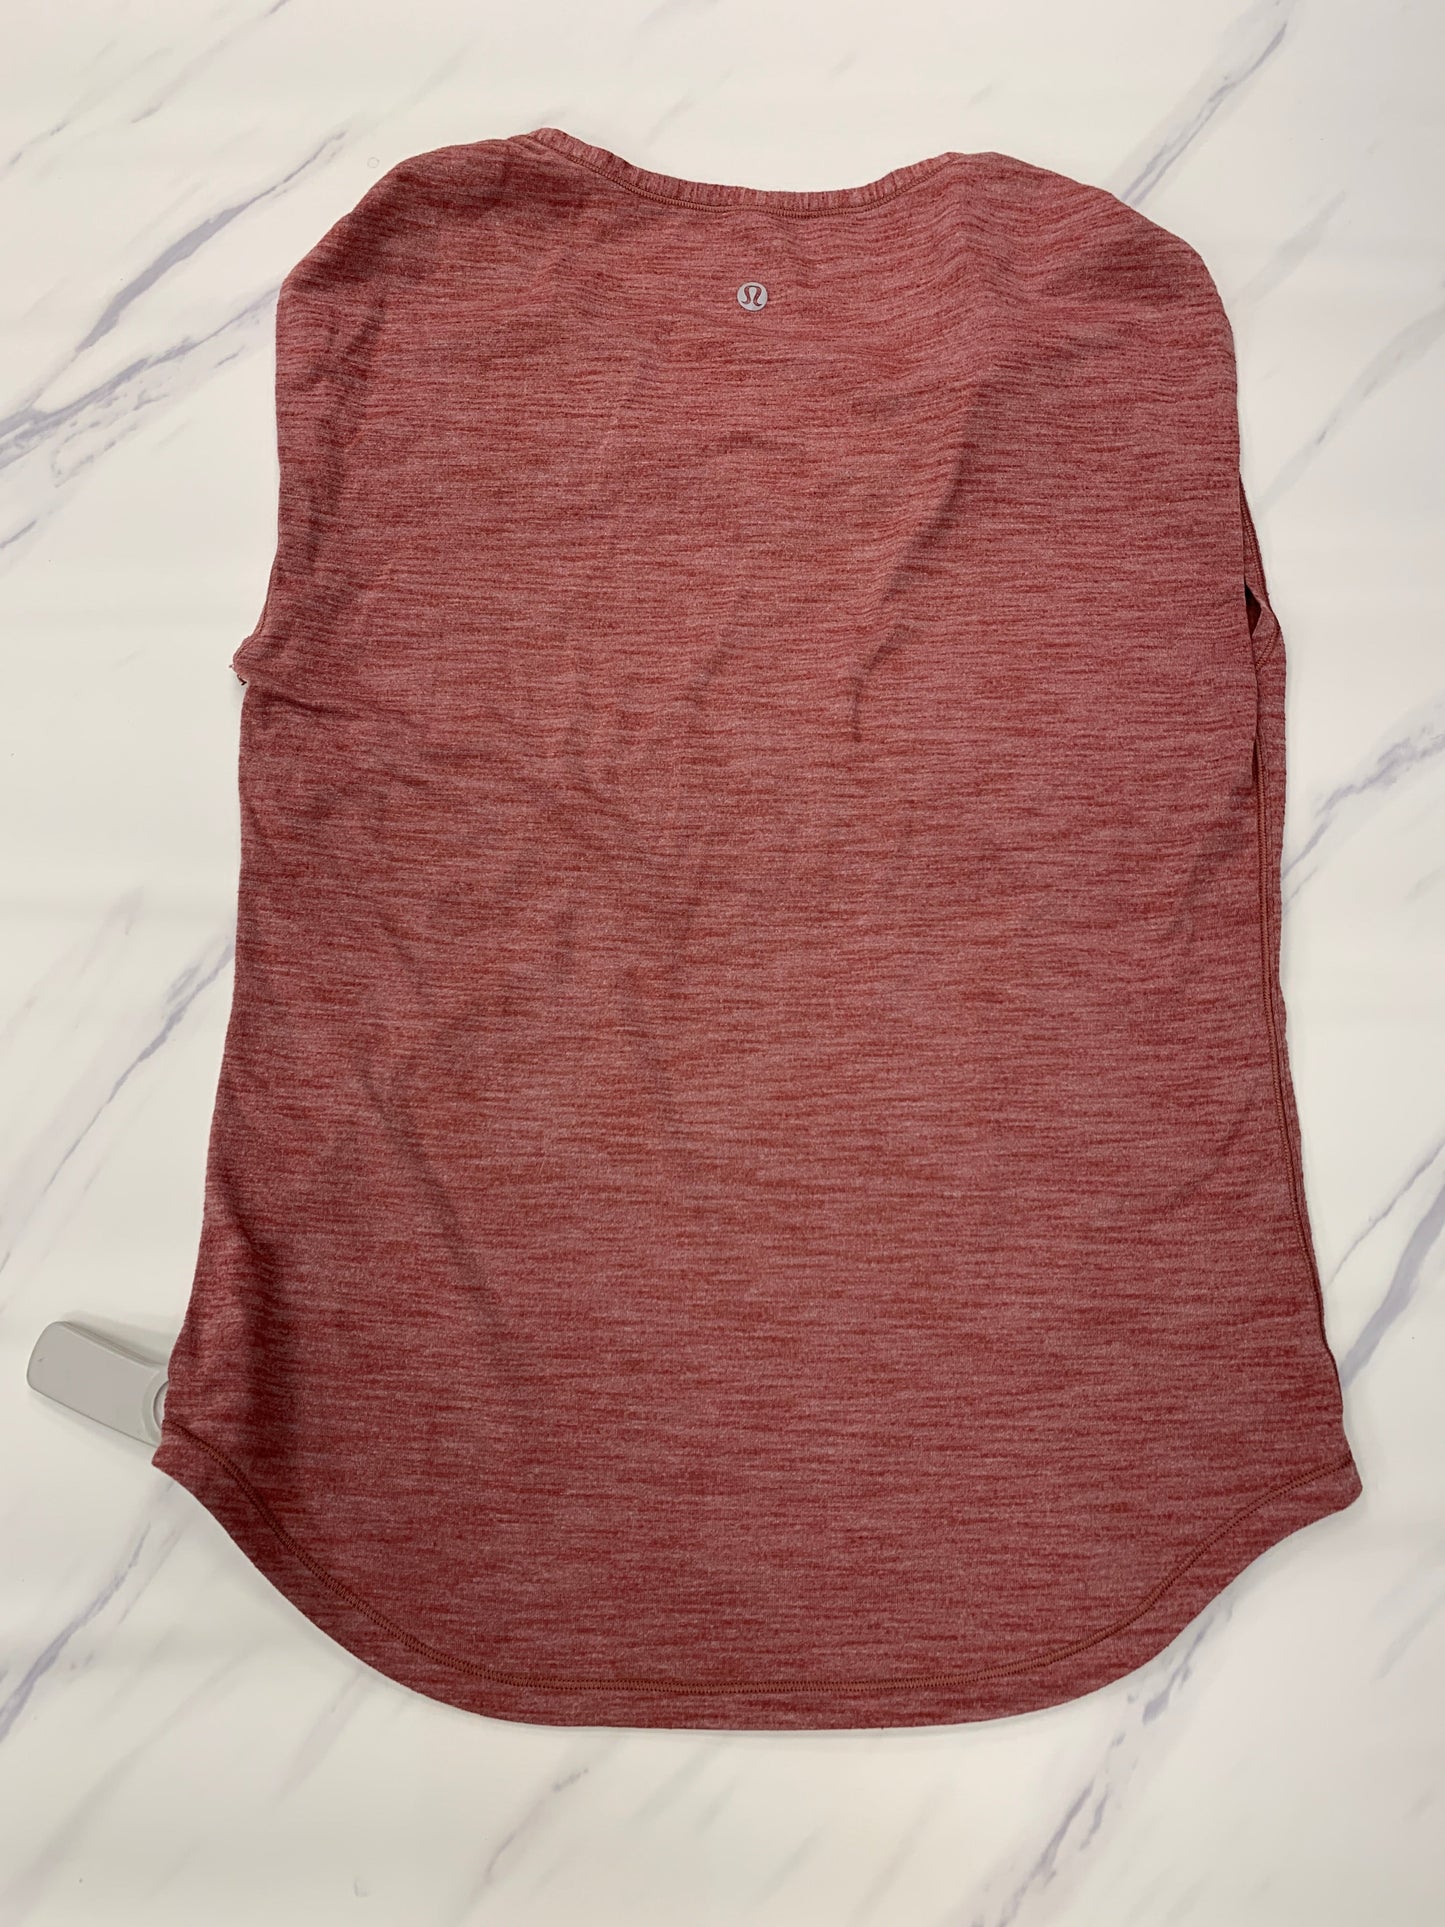 Red Athletic Tank Top Lululemon, Size 4